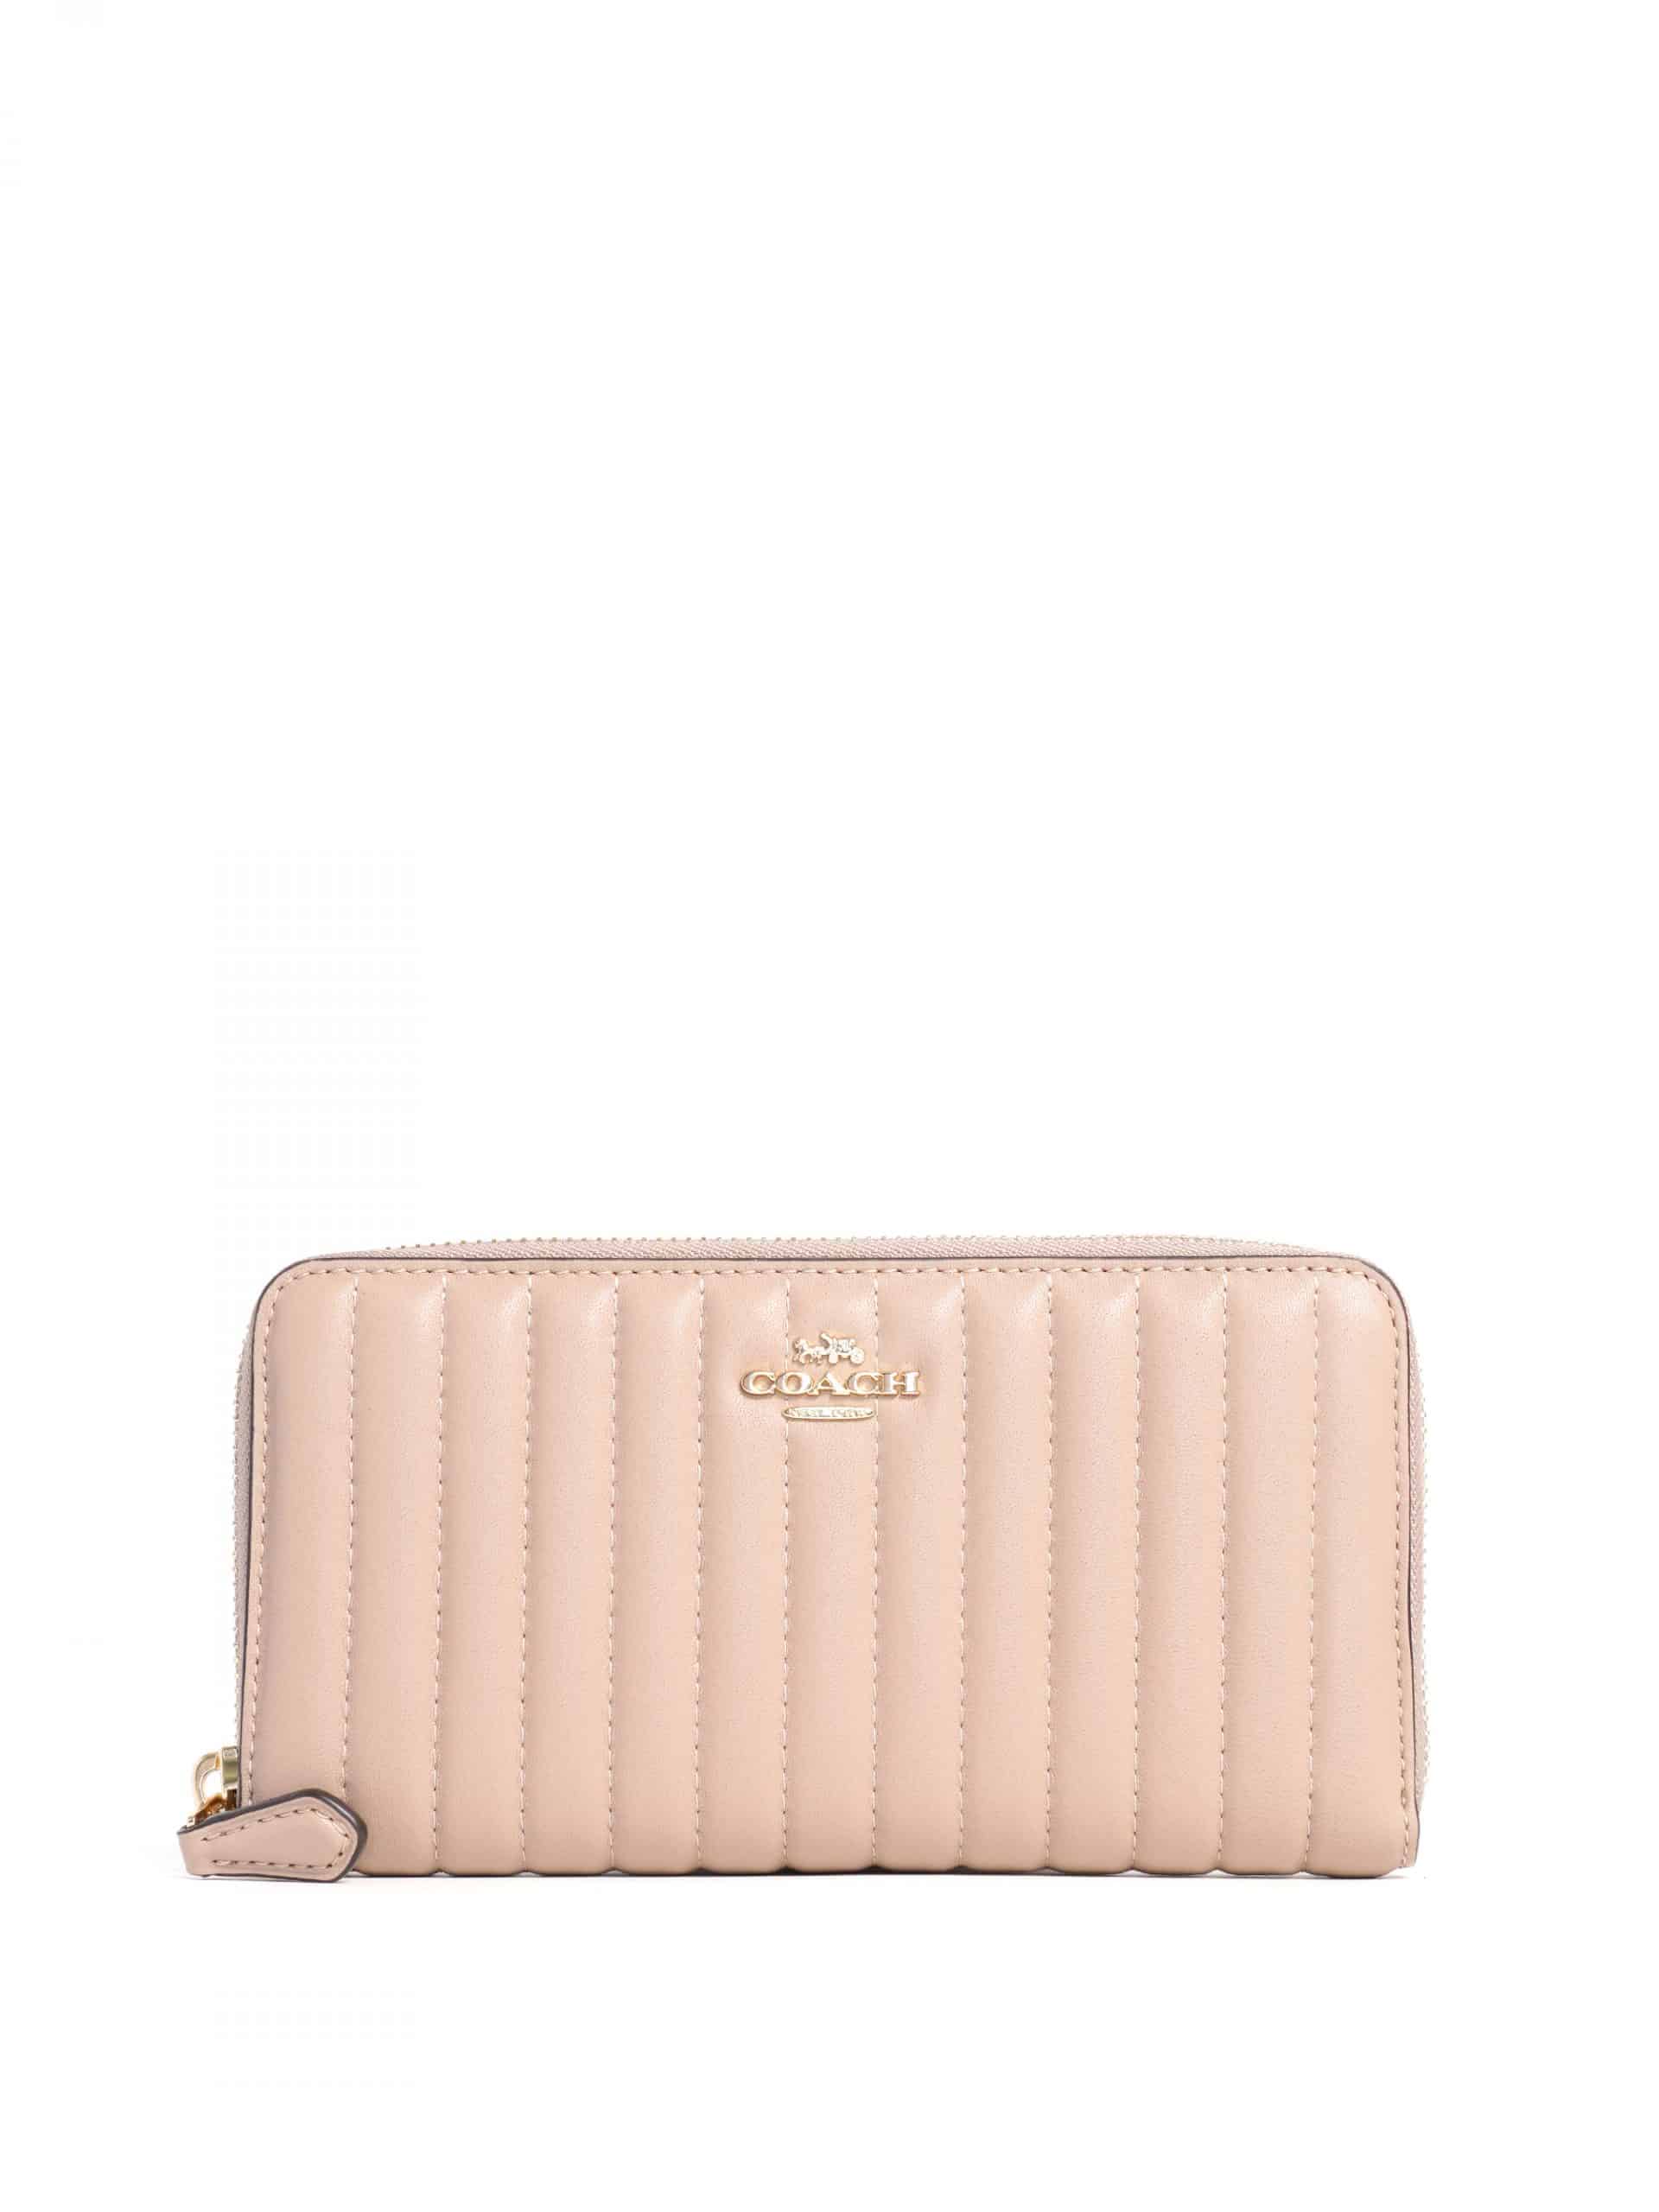 Coach 2855 Accordion Zip Wallet with Linear Quilting - Chalk